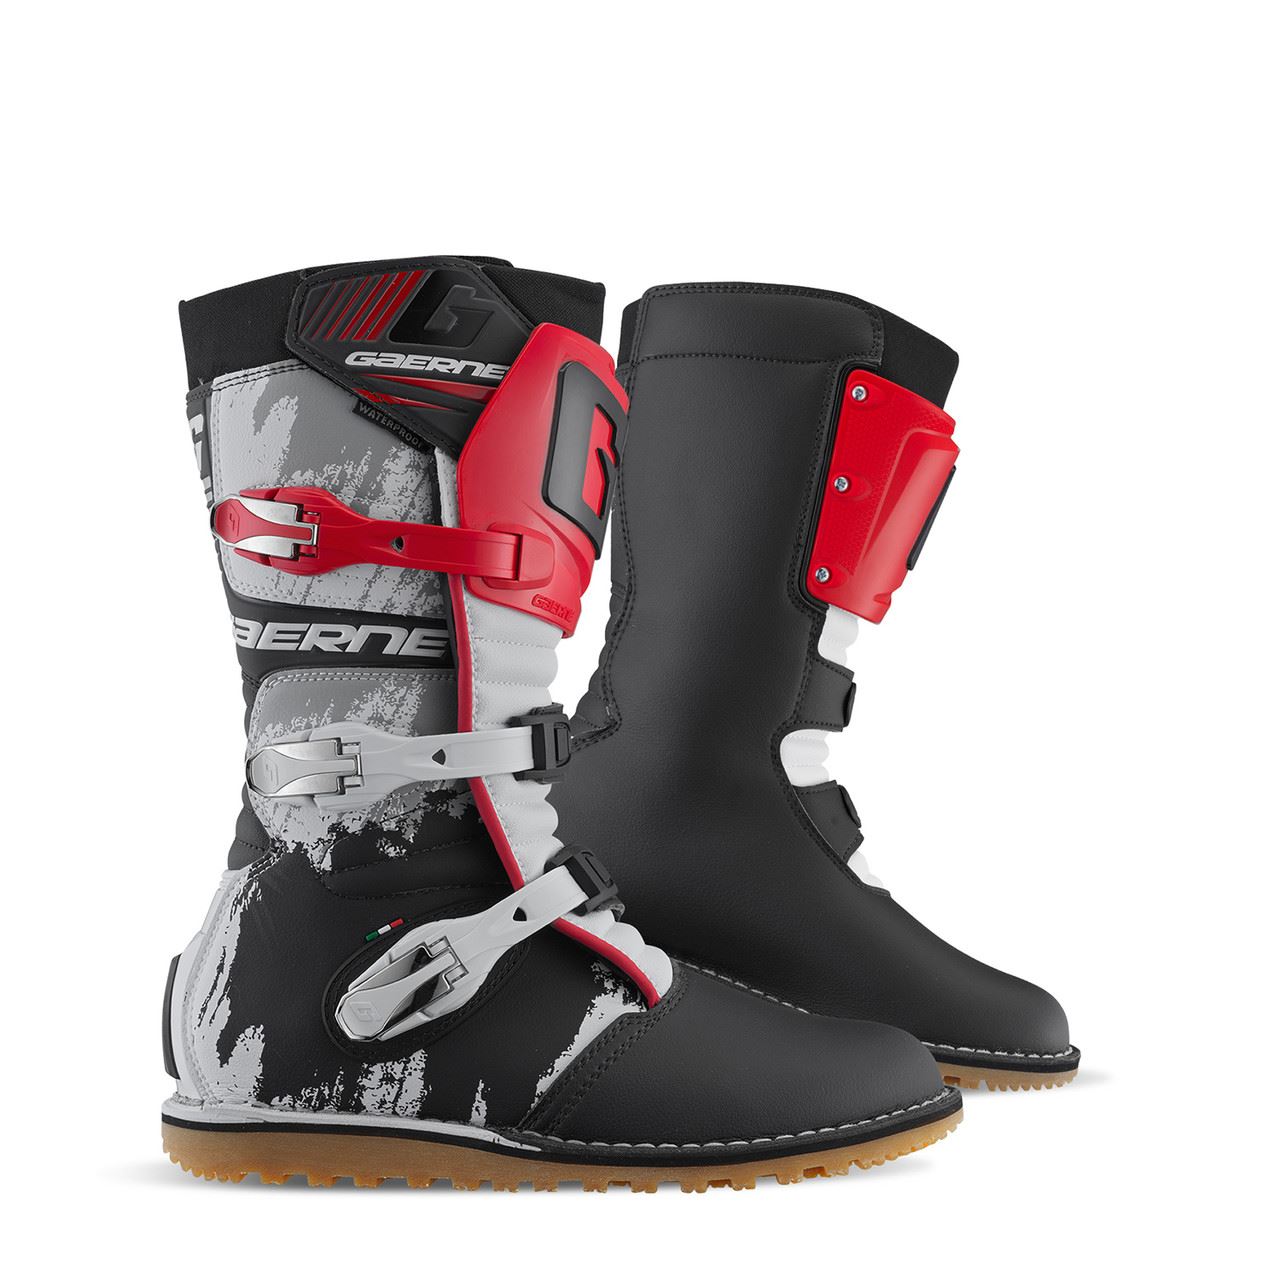 Gaerne Balance Classic Trials Boots Red Black